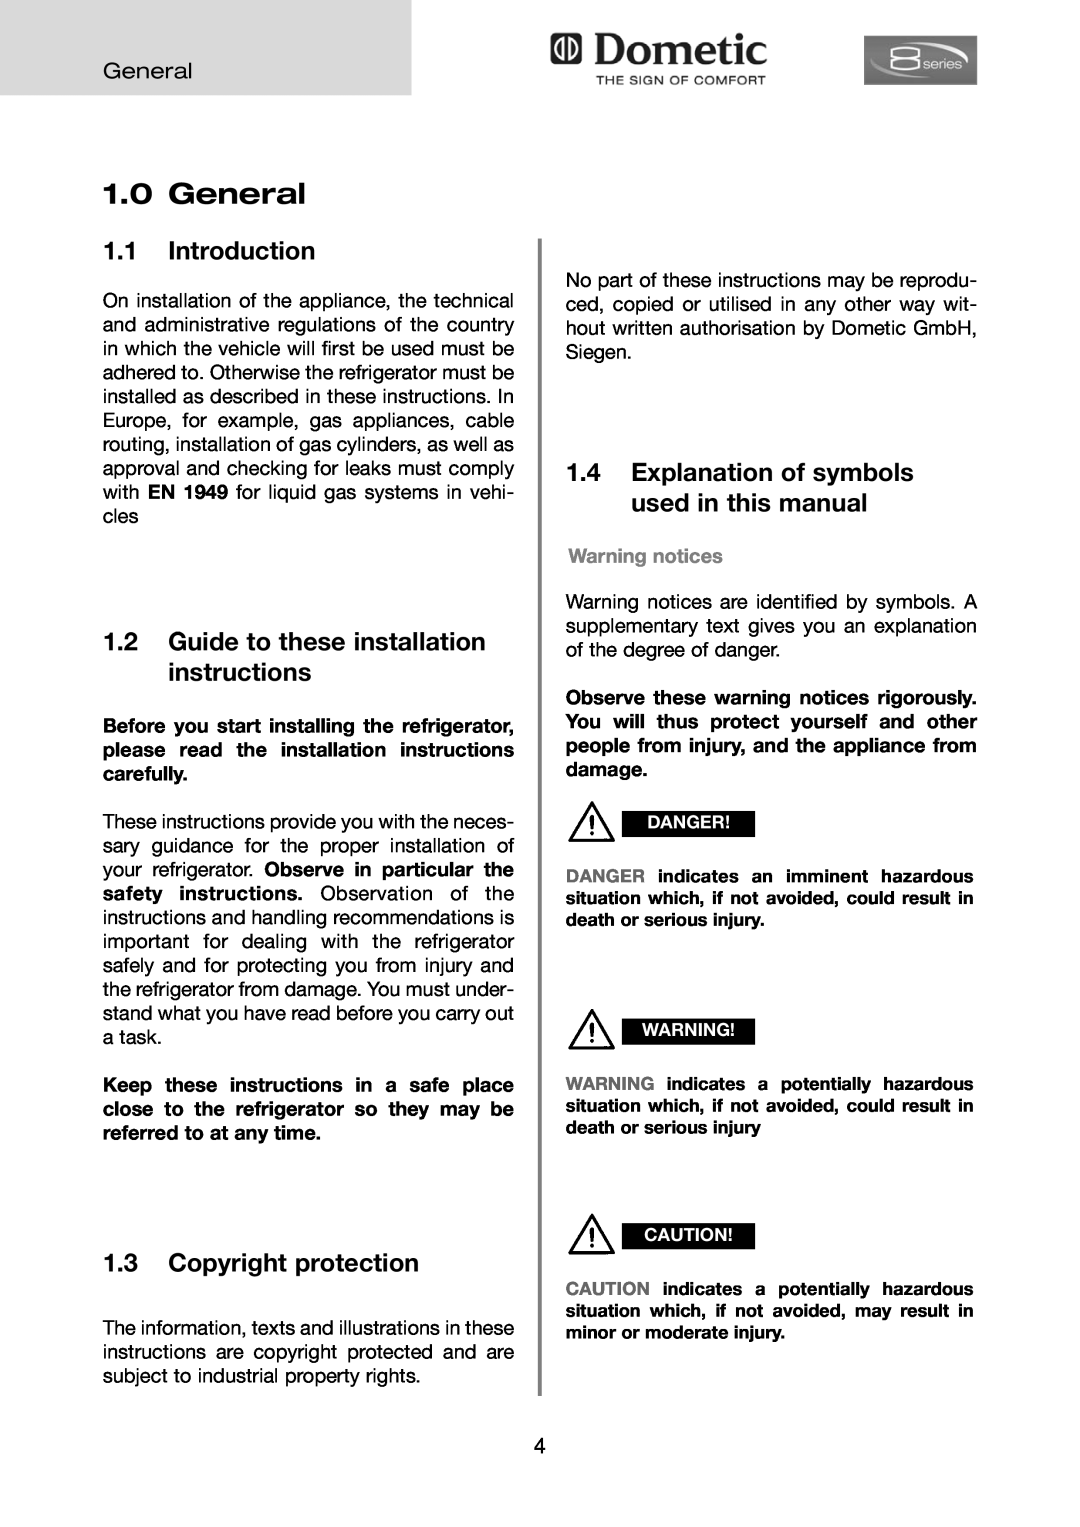 Dometic RMD 8505 General, Introduction, Guide to these installation instructions, Copyright protection, Warning notices 